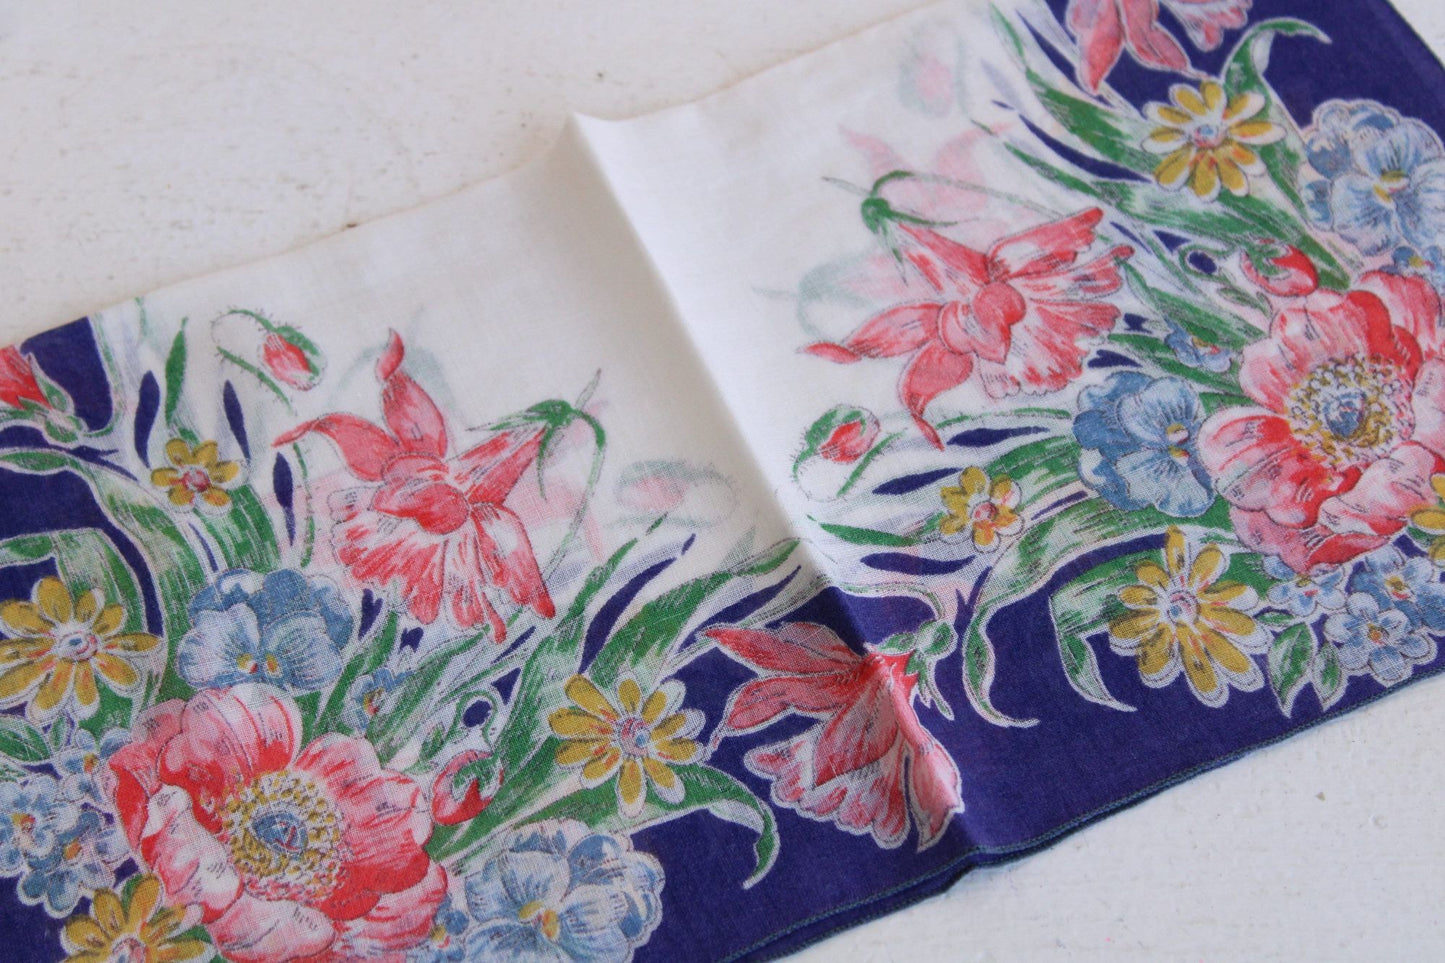 Vintage 1950s Red Blue and Yellow Wildflowers Handkerchief